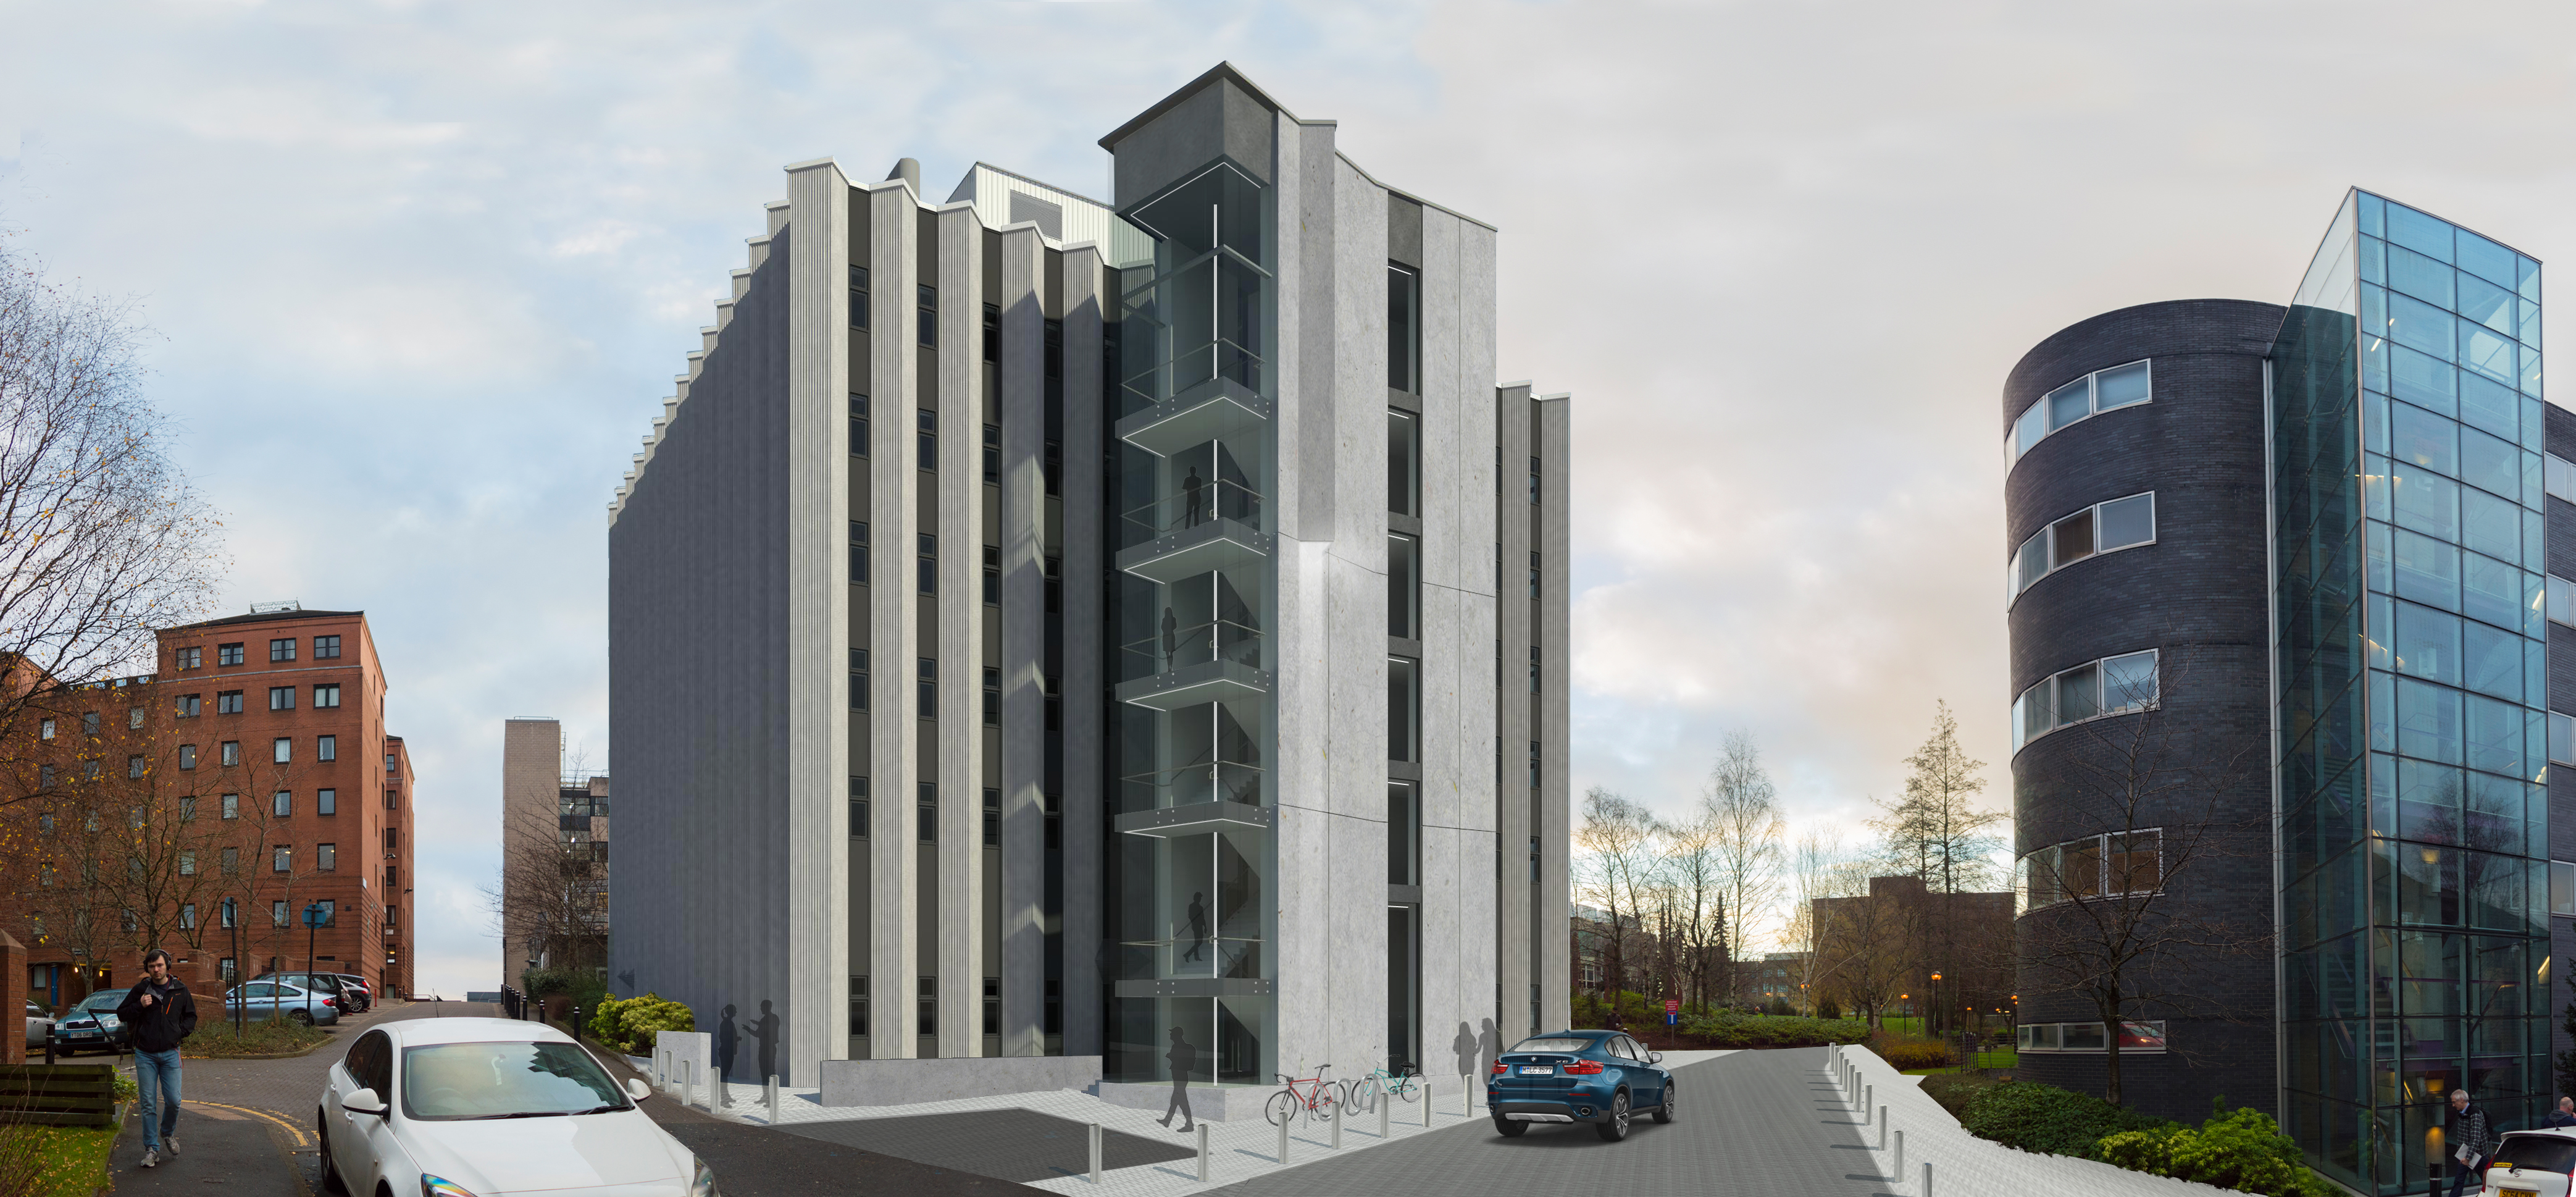 Taylor and Fraser begins M&E work on University of Strathclyde’s Wolfson Building